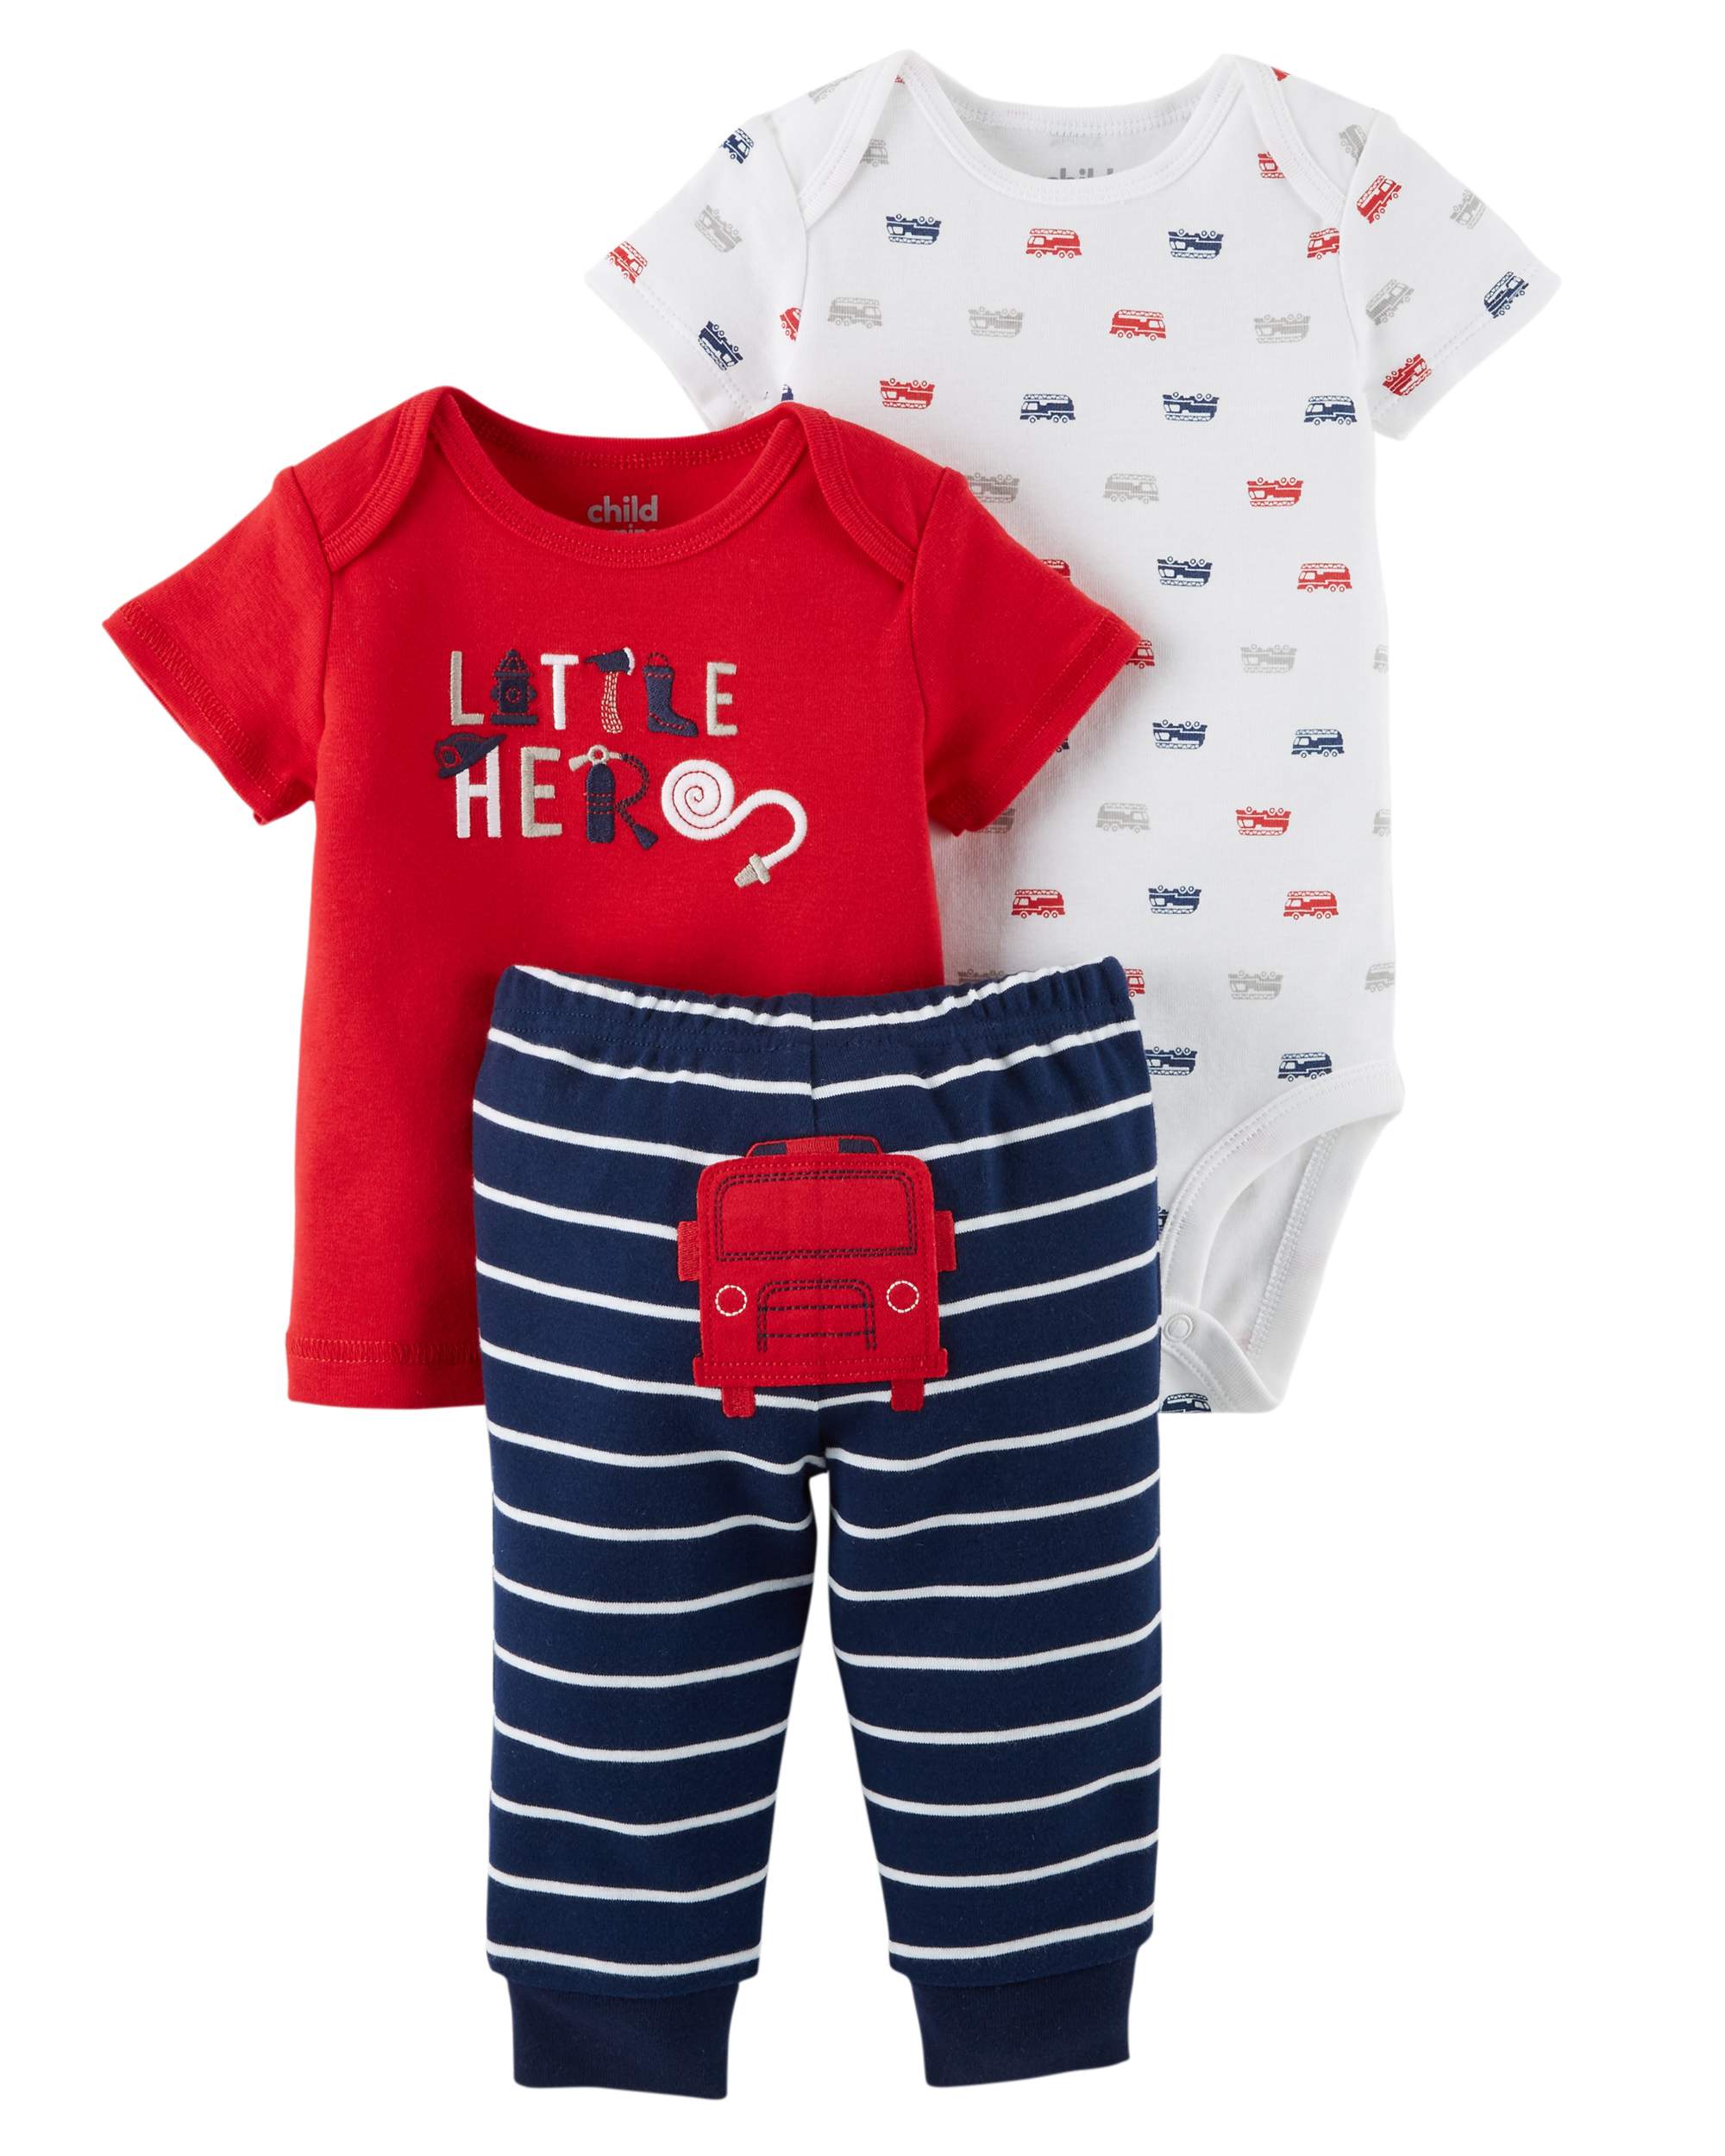 Carters Baby Boy Clothes Clearance Baby Cloths